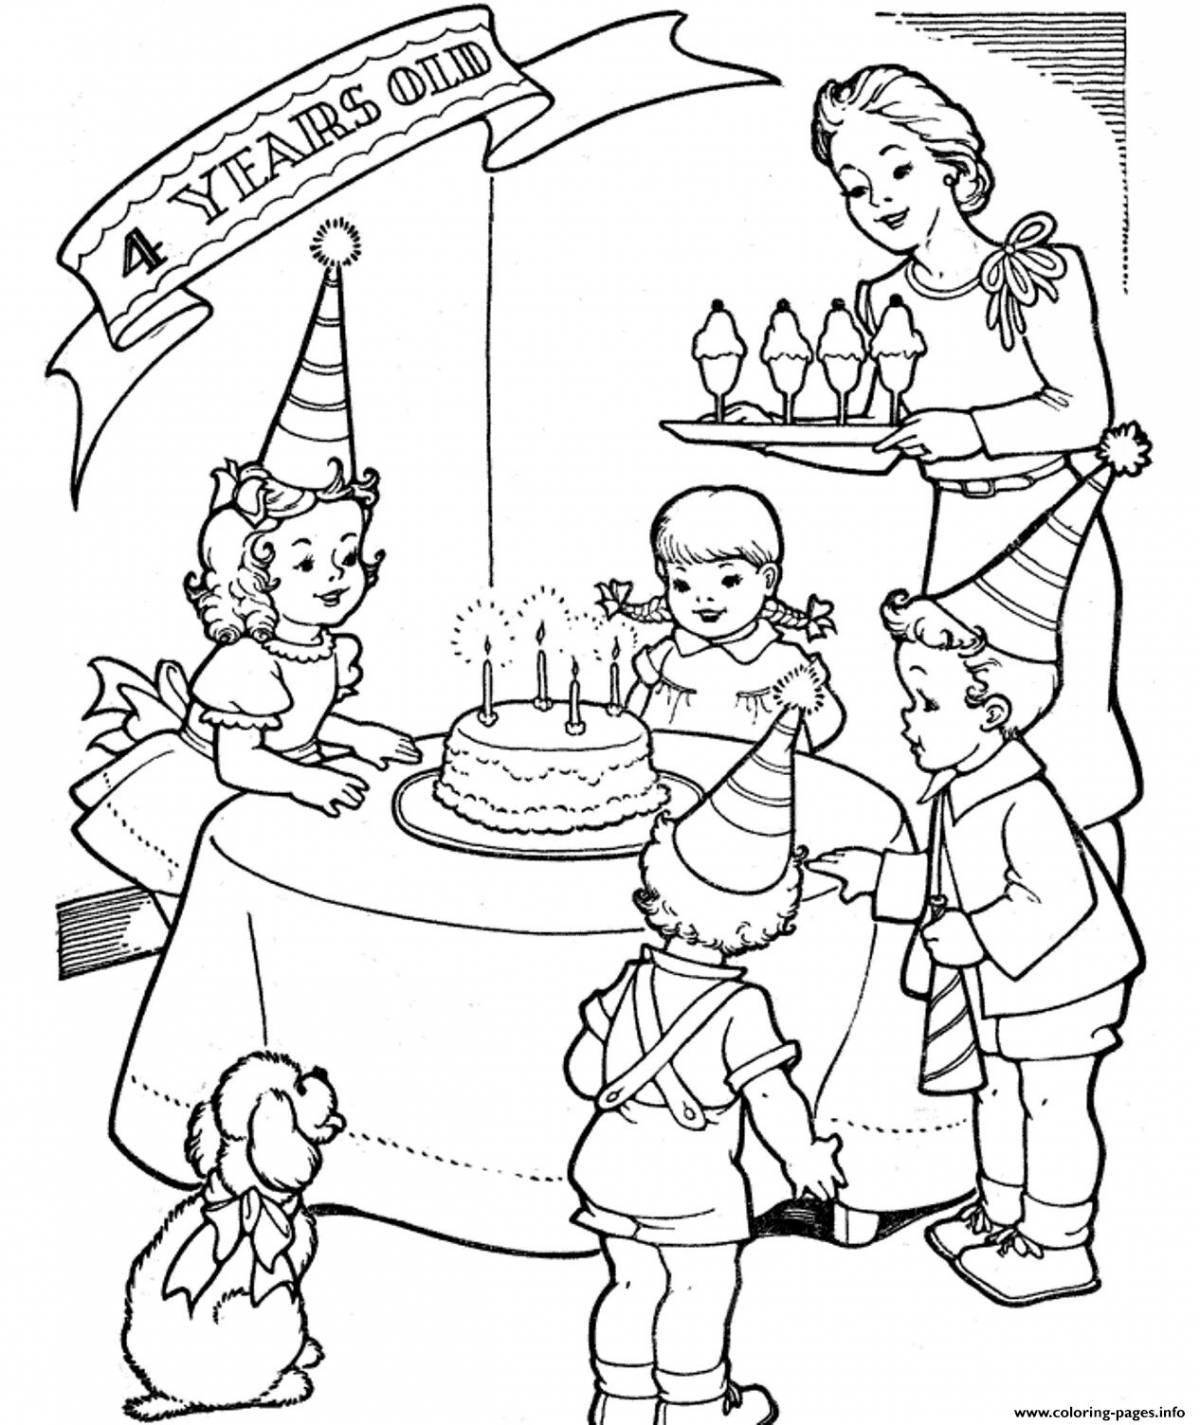 Ecstatic away coloring page